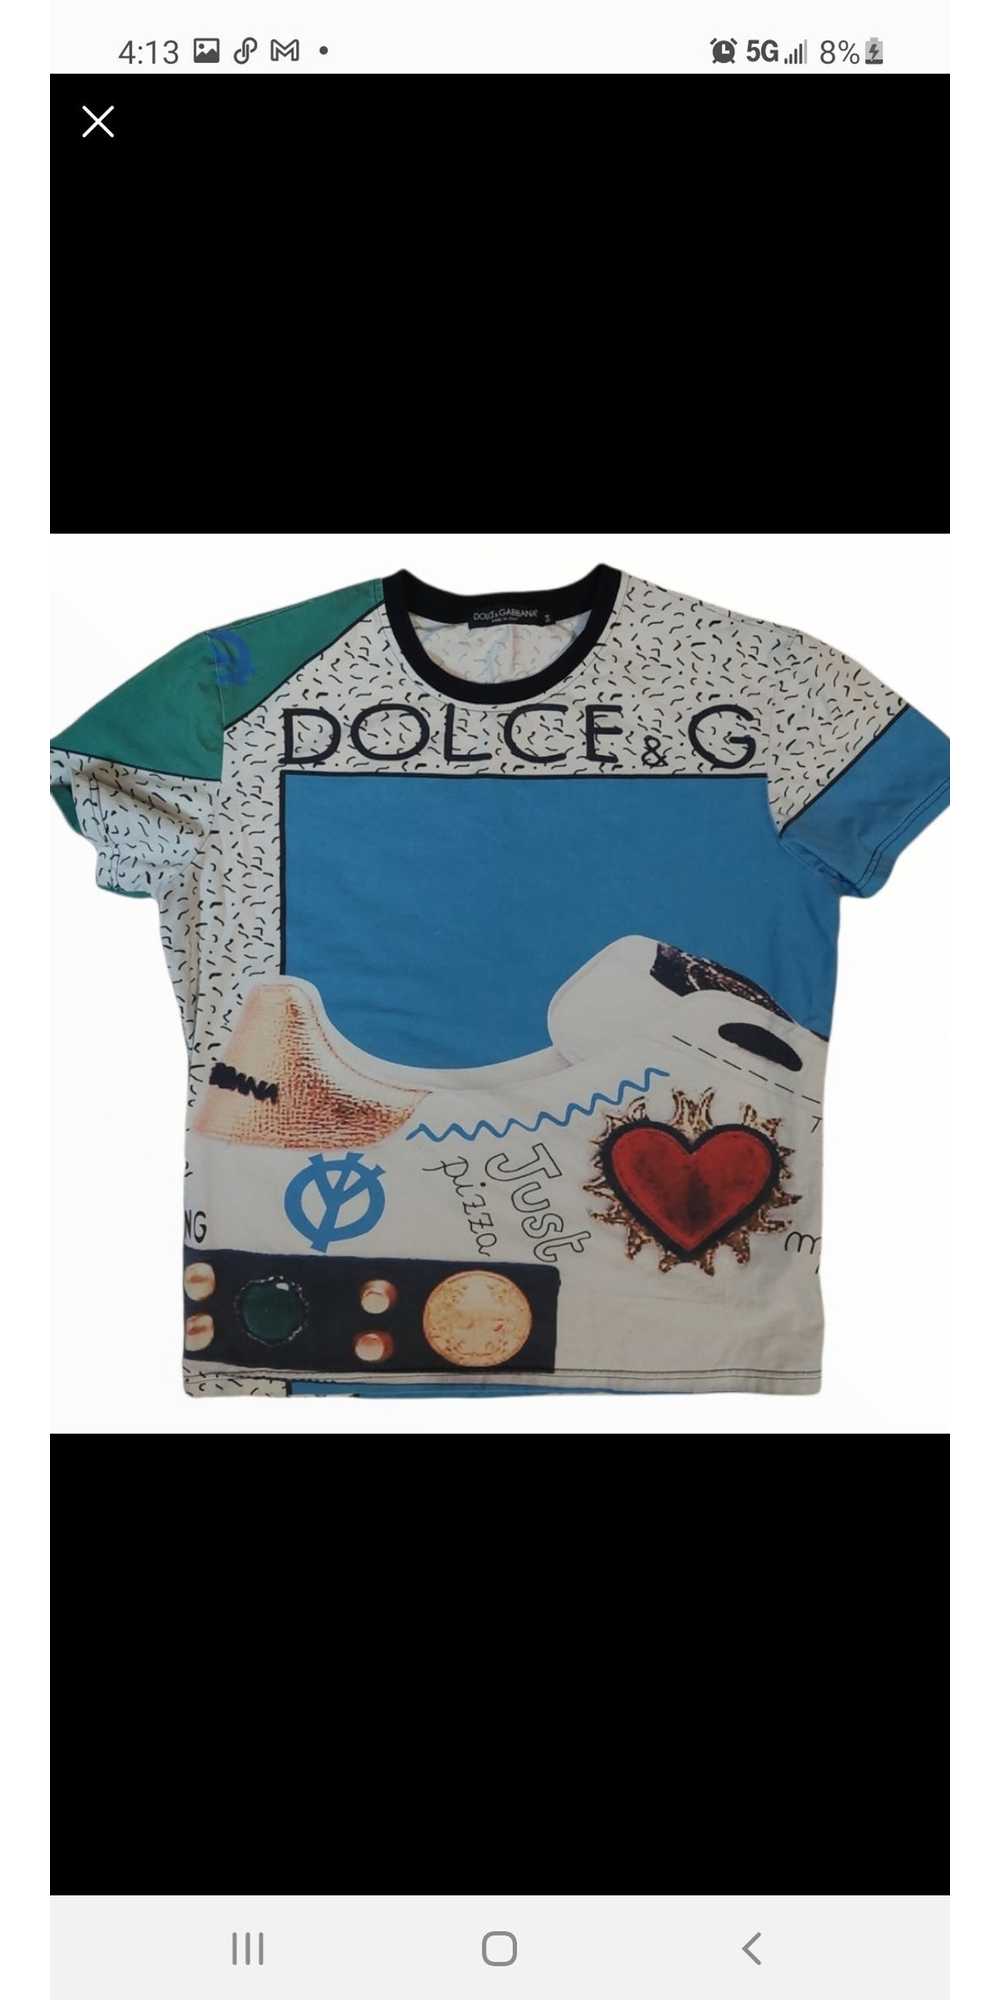 Dolce & Gabbana Just Pizza Tee Shirt in Light Blue - image 8